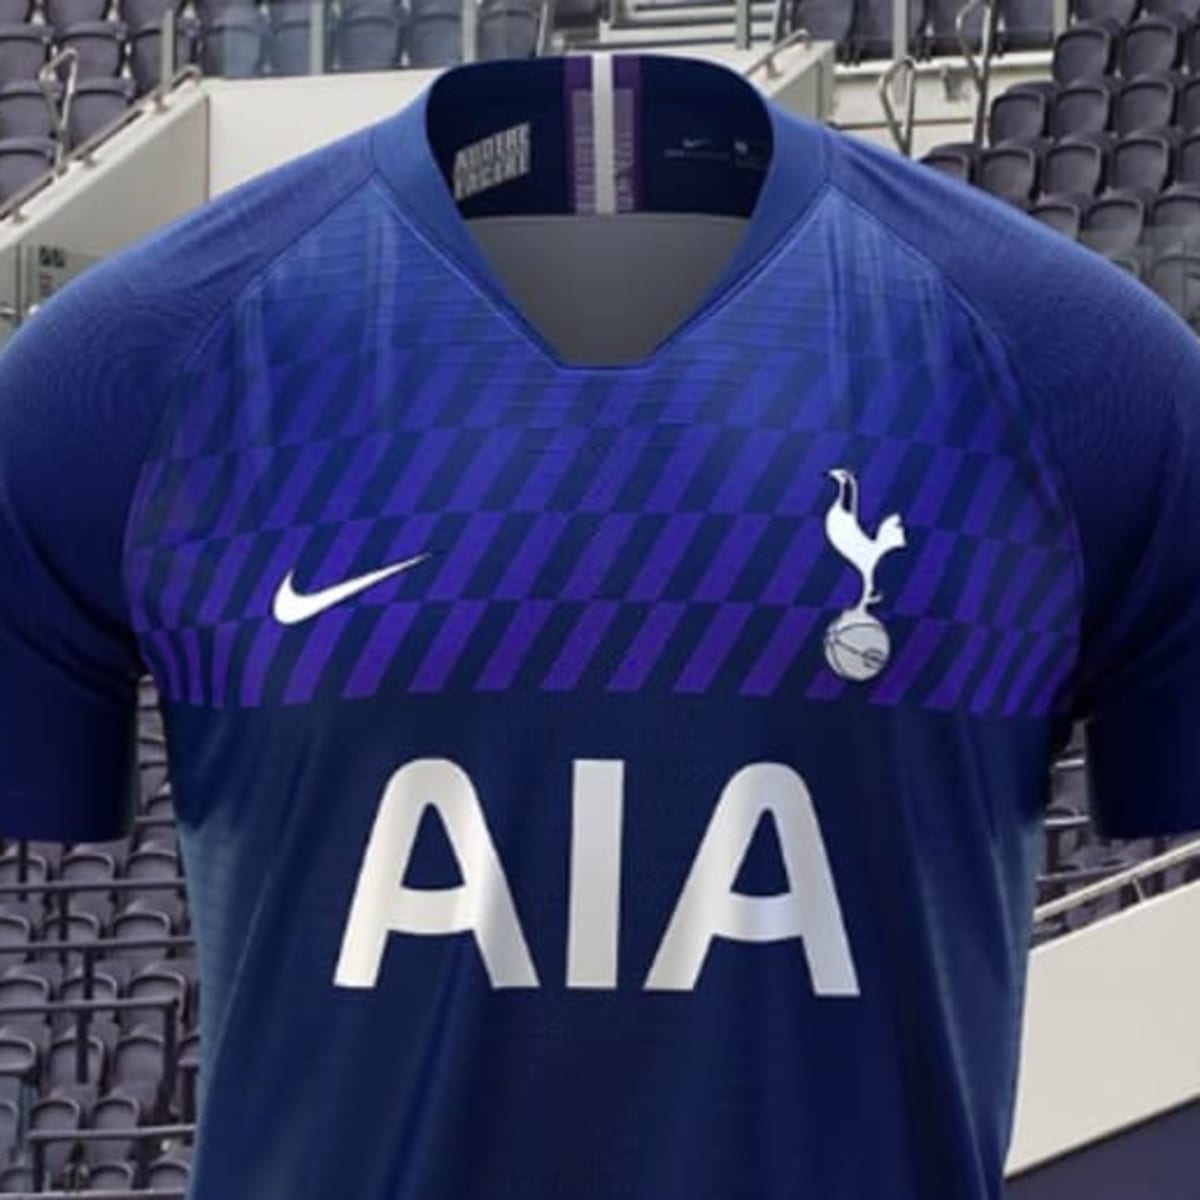 SPURS NEW 2019/20 HOME KIT - OUT NOW! 